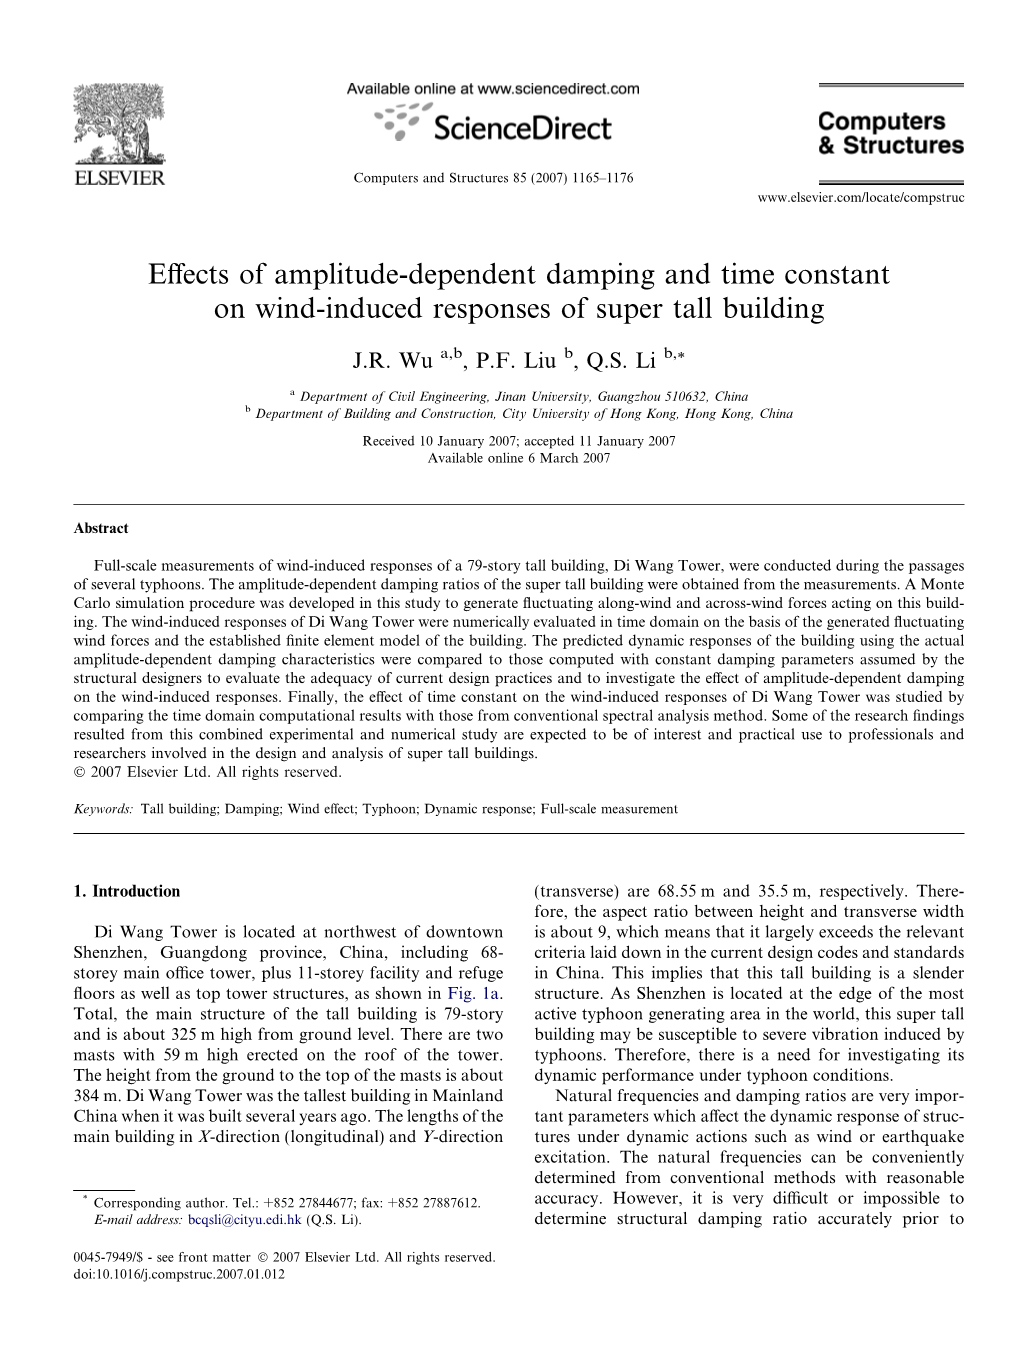 Effects of Amplitude-Dependent Damping and Time Constant on Wind